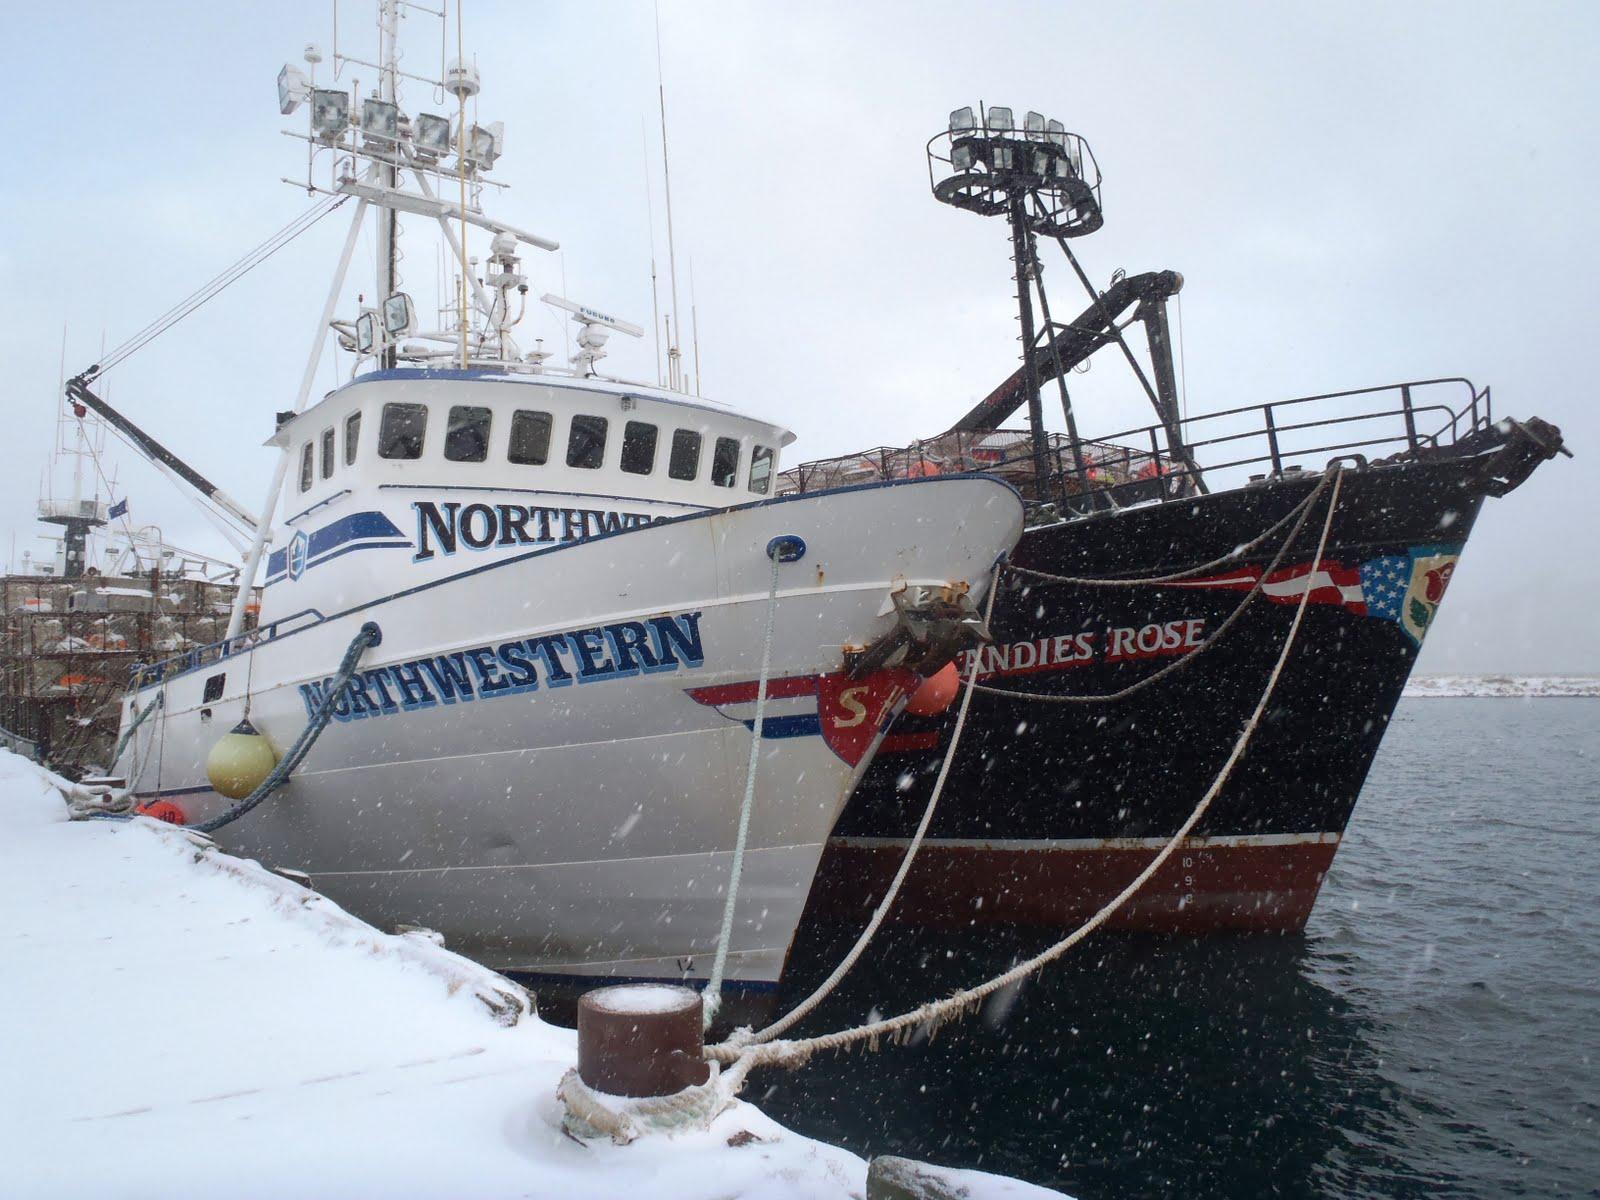 Dutch Harbor Dirt to Nome Dirt: Deadliest Catch Boats on Christmas